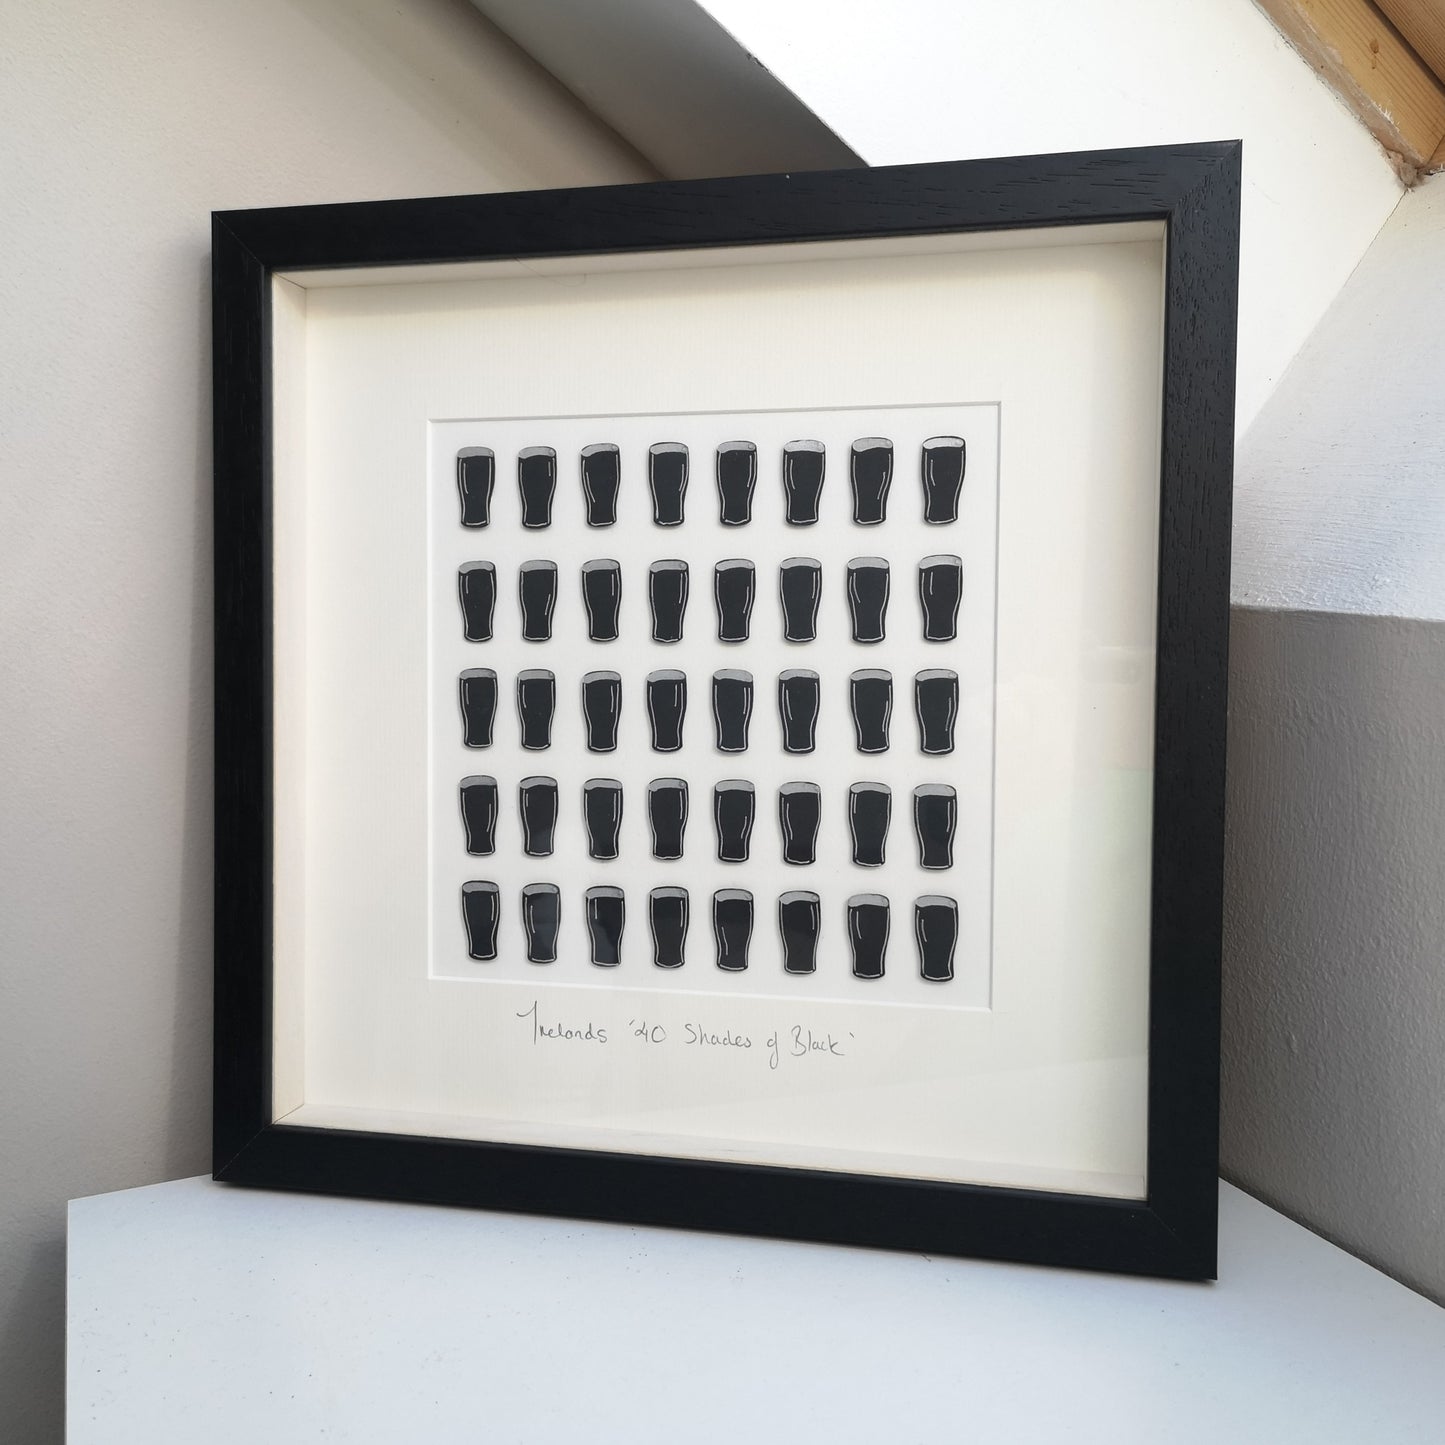 40 Shades of Black papercutting frame featuring 40 handcut and hand painted pints of guinness